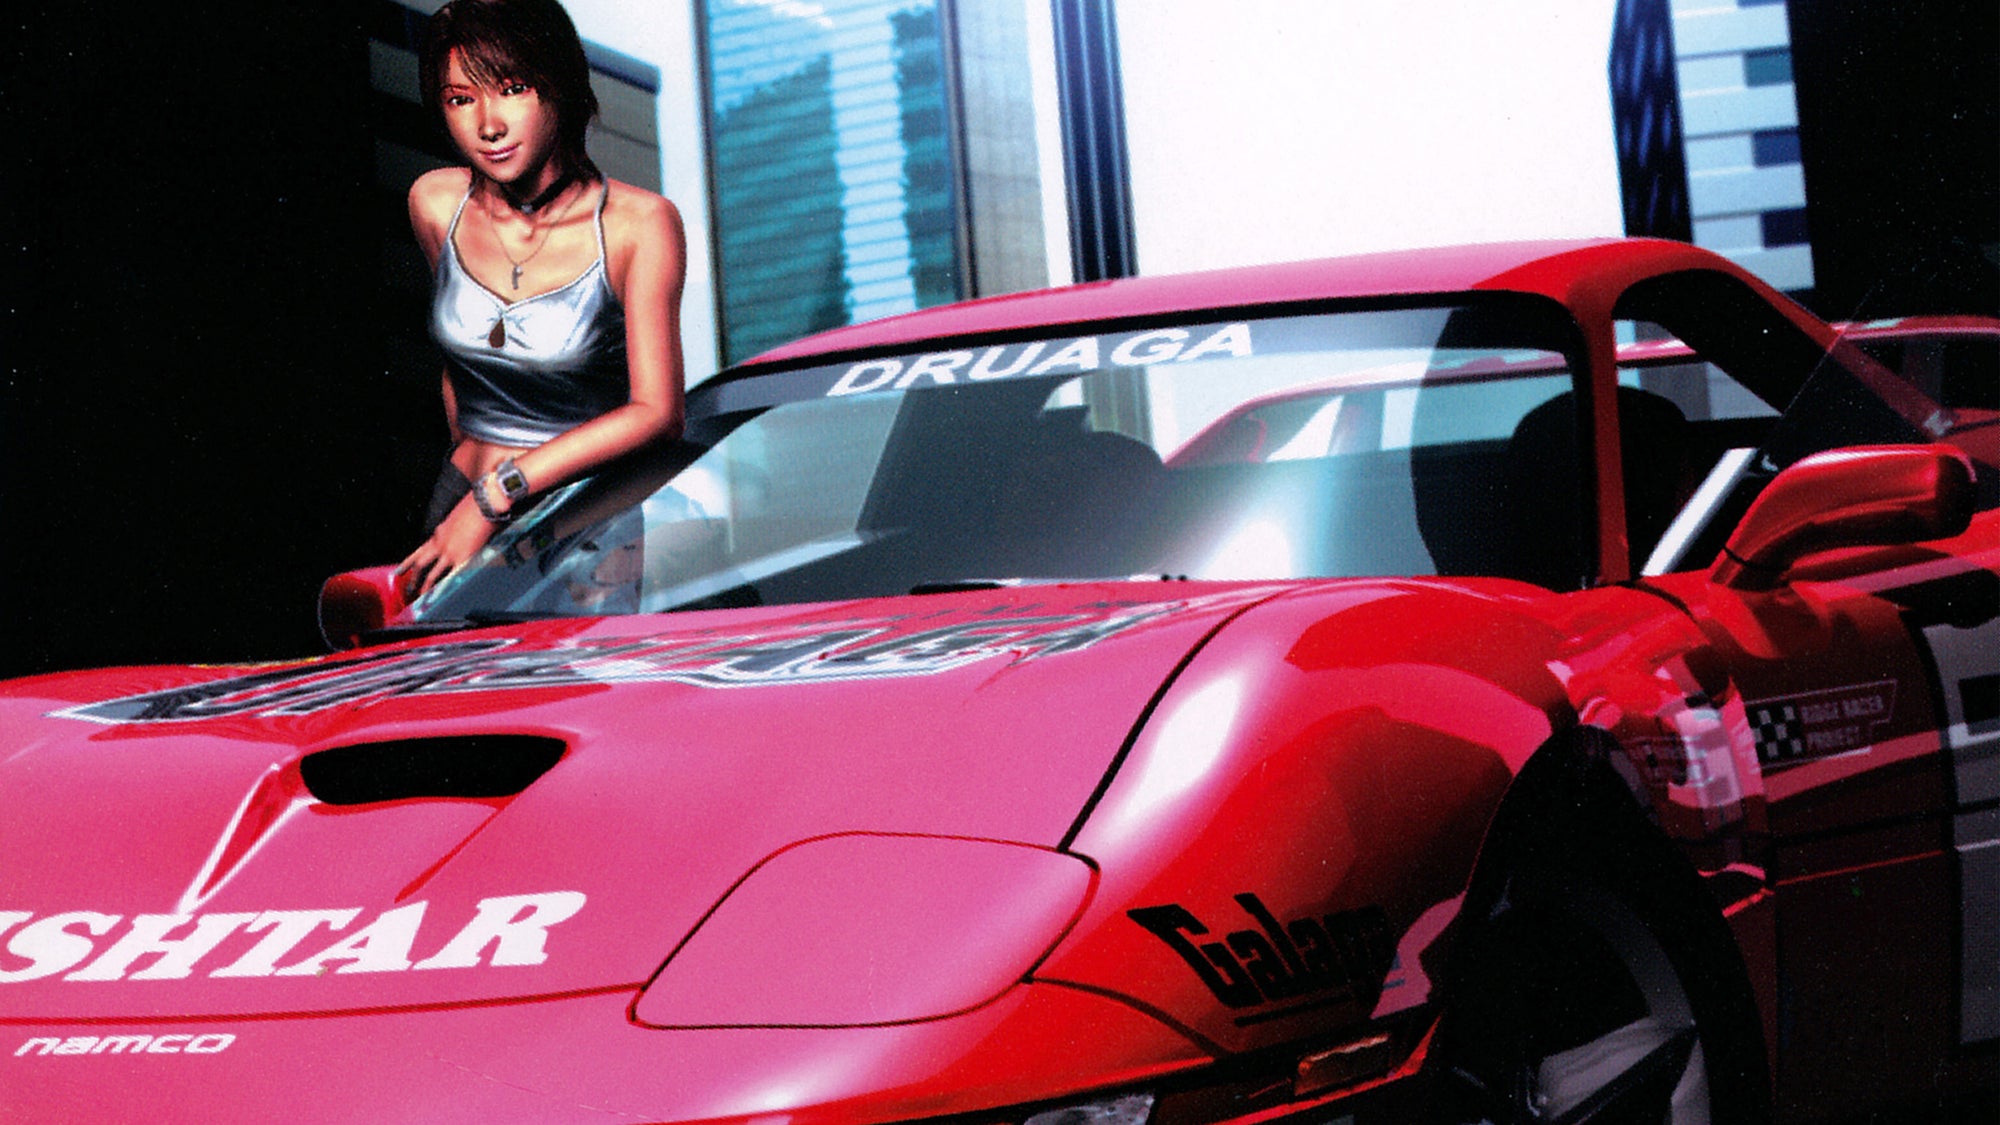 I really hope for a Christmas gift of a sequel to Ridge Racer V.